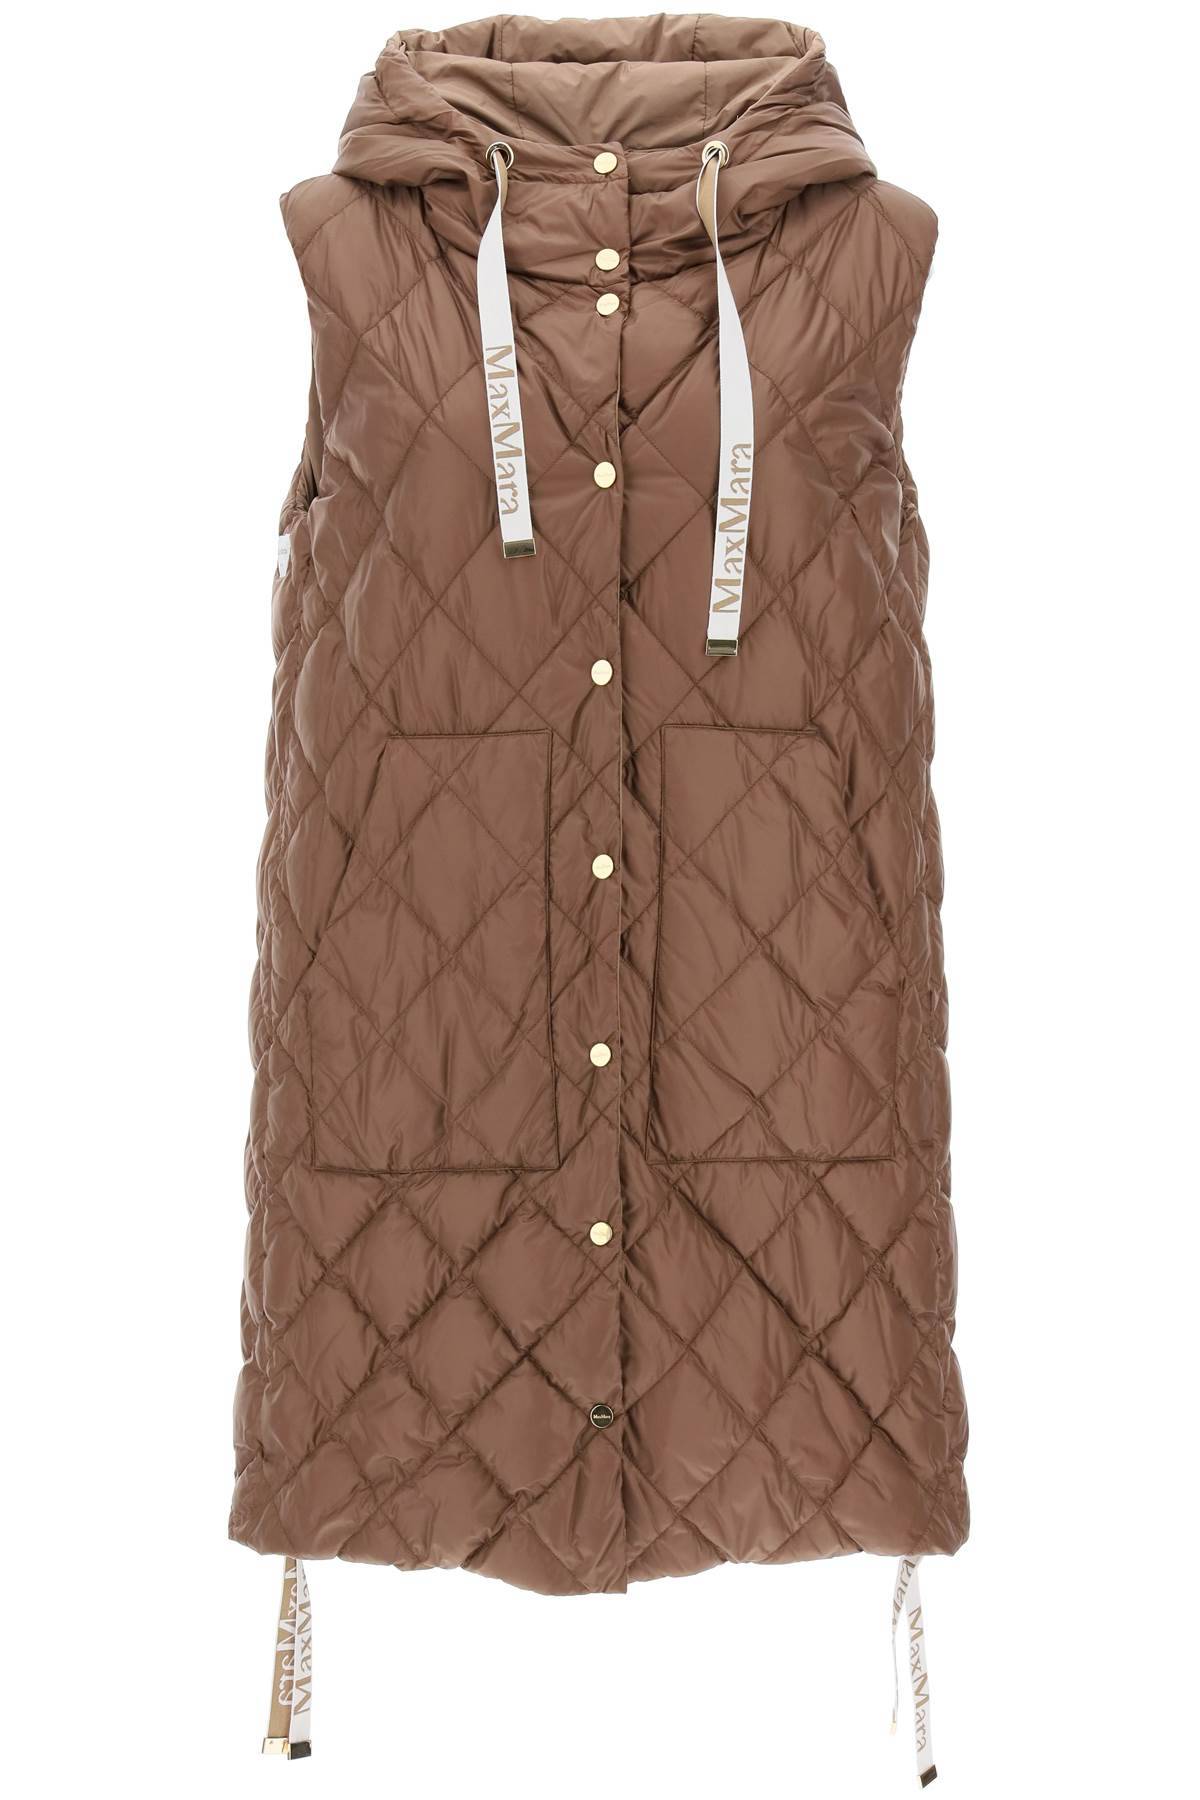 MAX MARA THE CUBE MAX MARA THE CUBE sisoft quilted vest